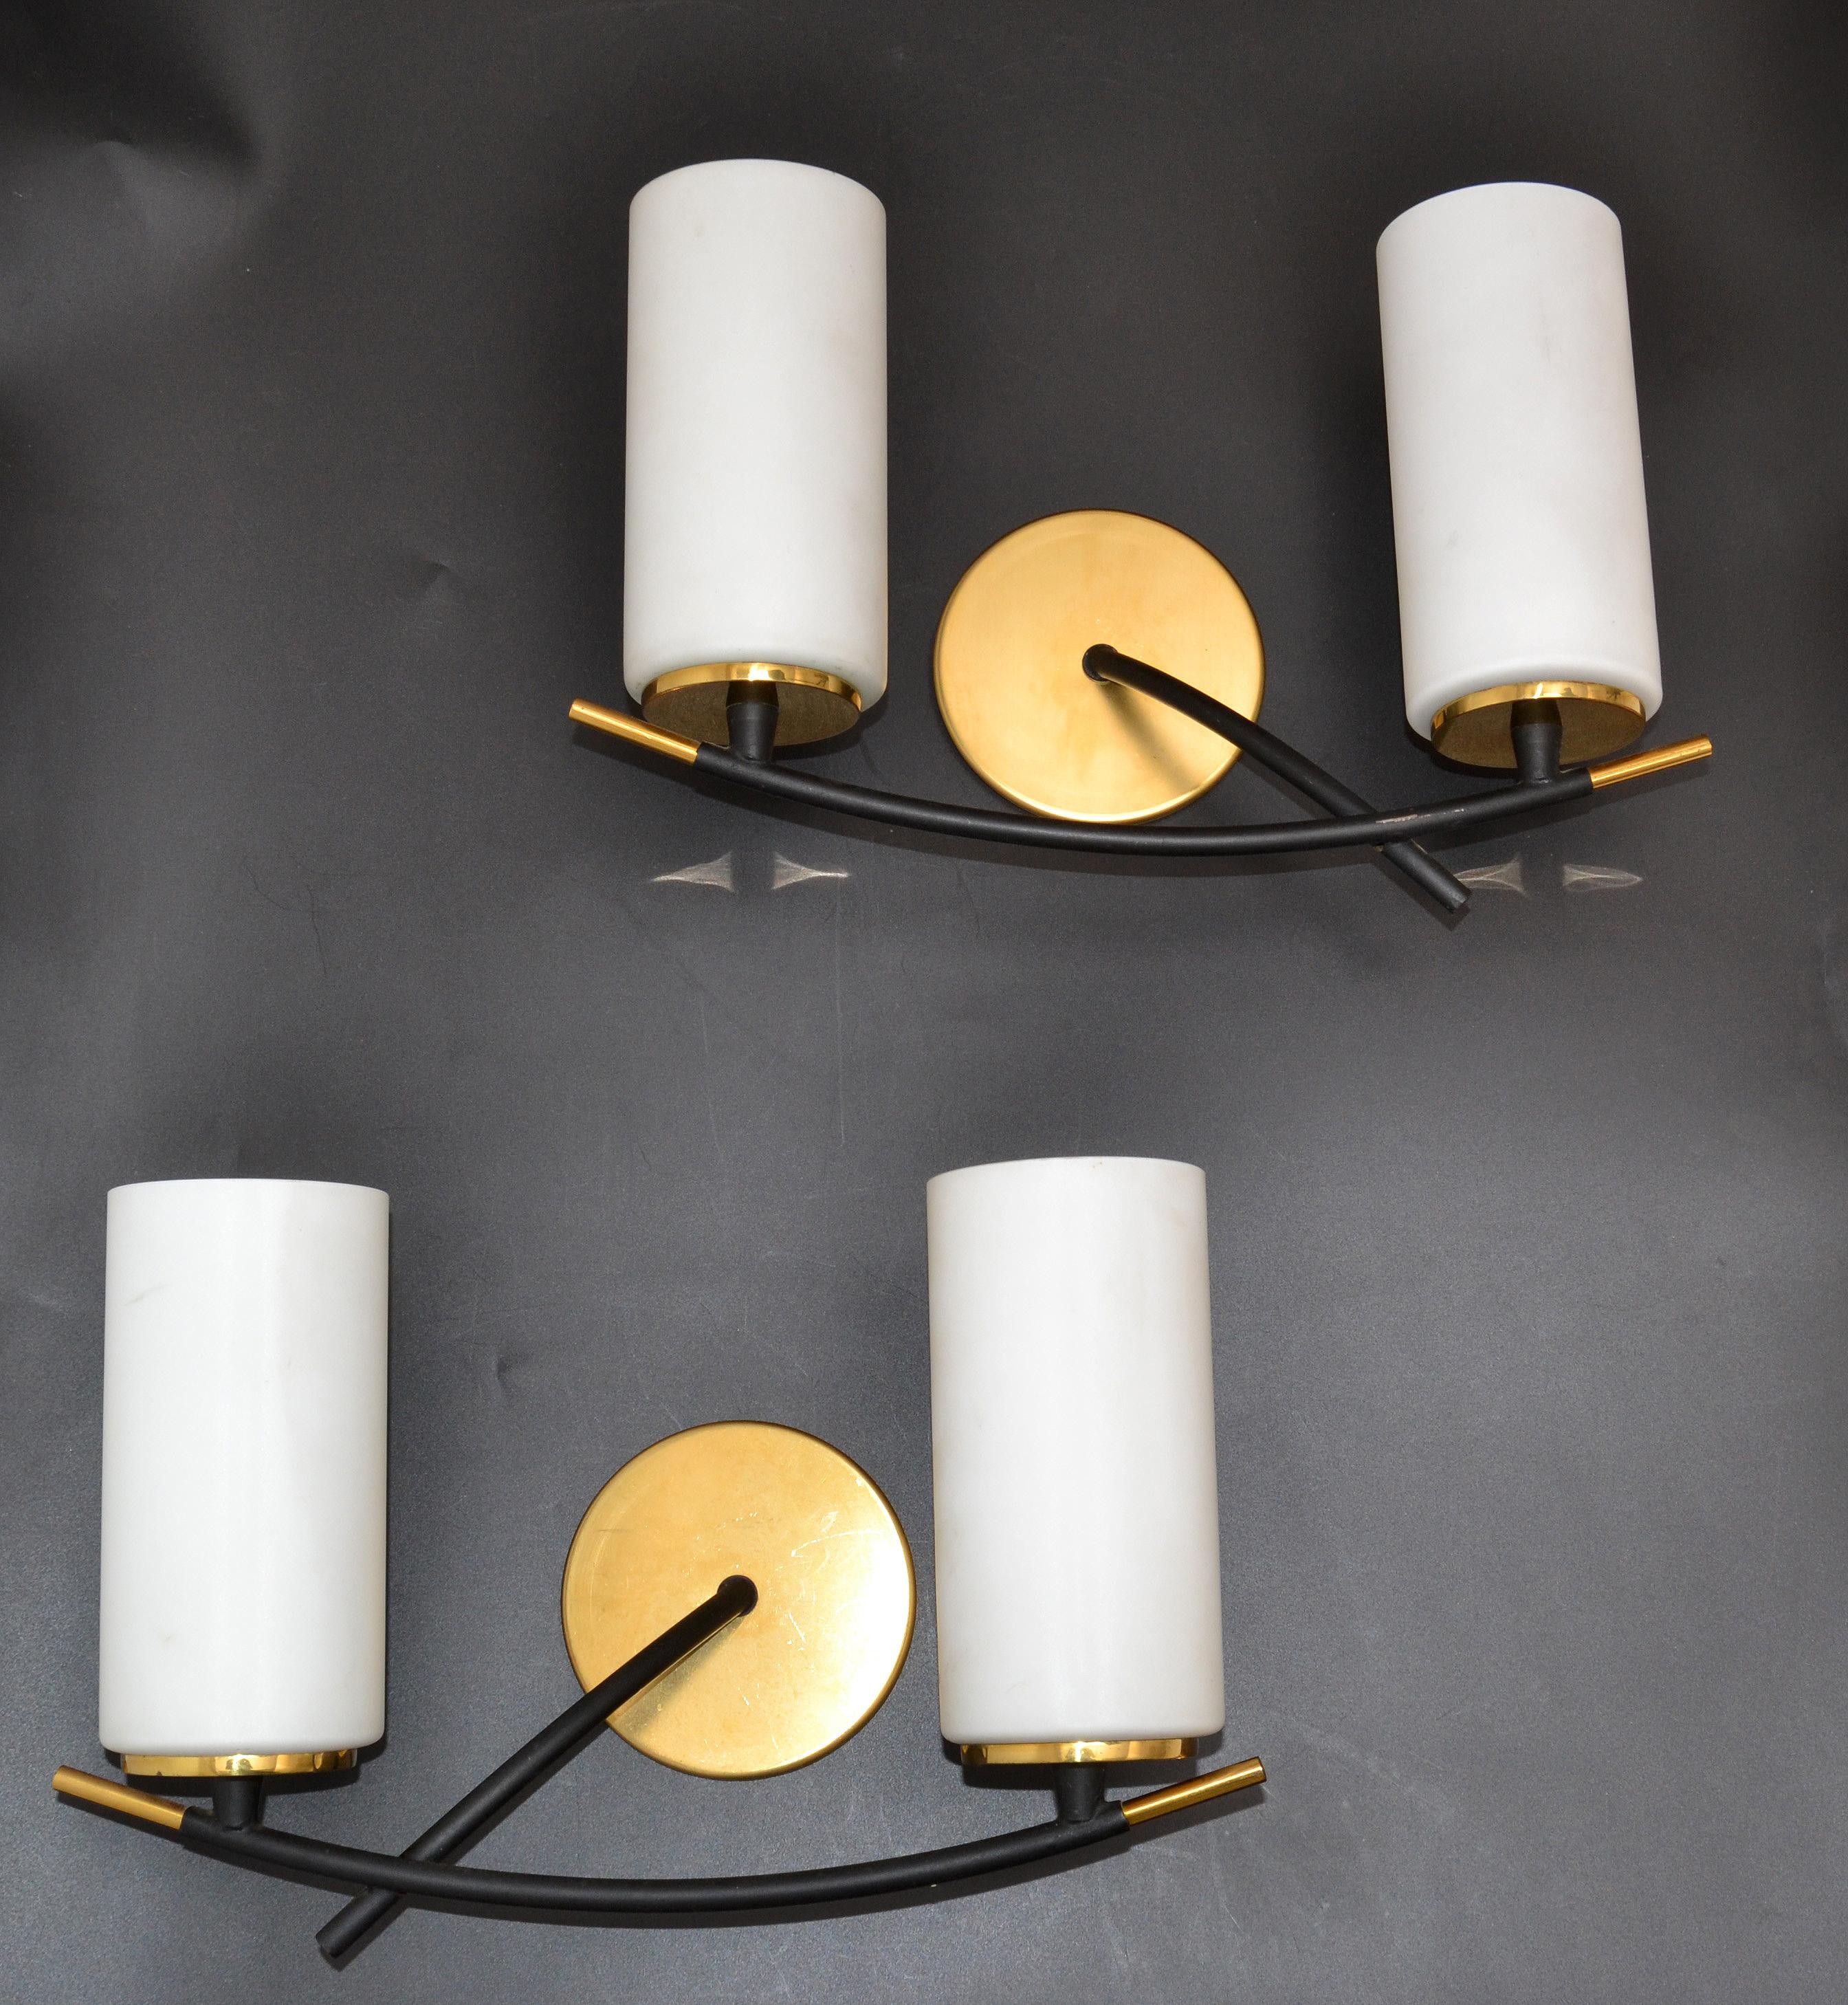 Pair of Maison Arlus 2 light sconce, wall light with original cylinder Opaline shades, made out of steel with brass details.
Both are the same size and mirror image of each other, superb French Design from the 1960s.
Each Sconces takes 2 light